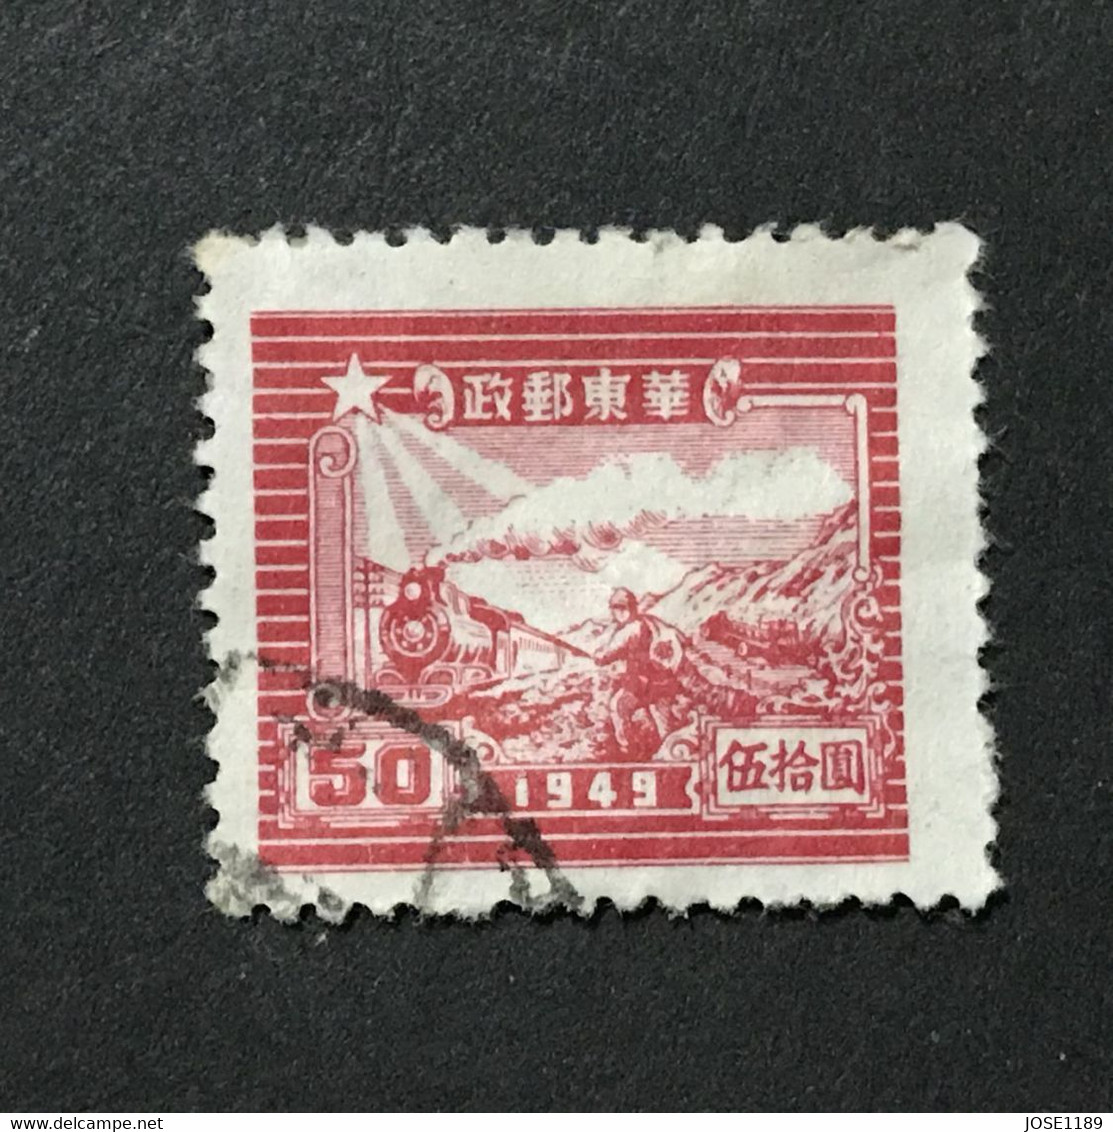 ◆◆◆CHINA 1949 2nd Print Traffic Means Design Issue , $50 USED  AB6807 - Ostchina 1949-50